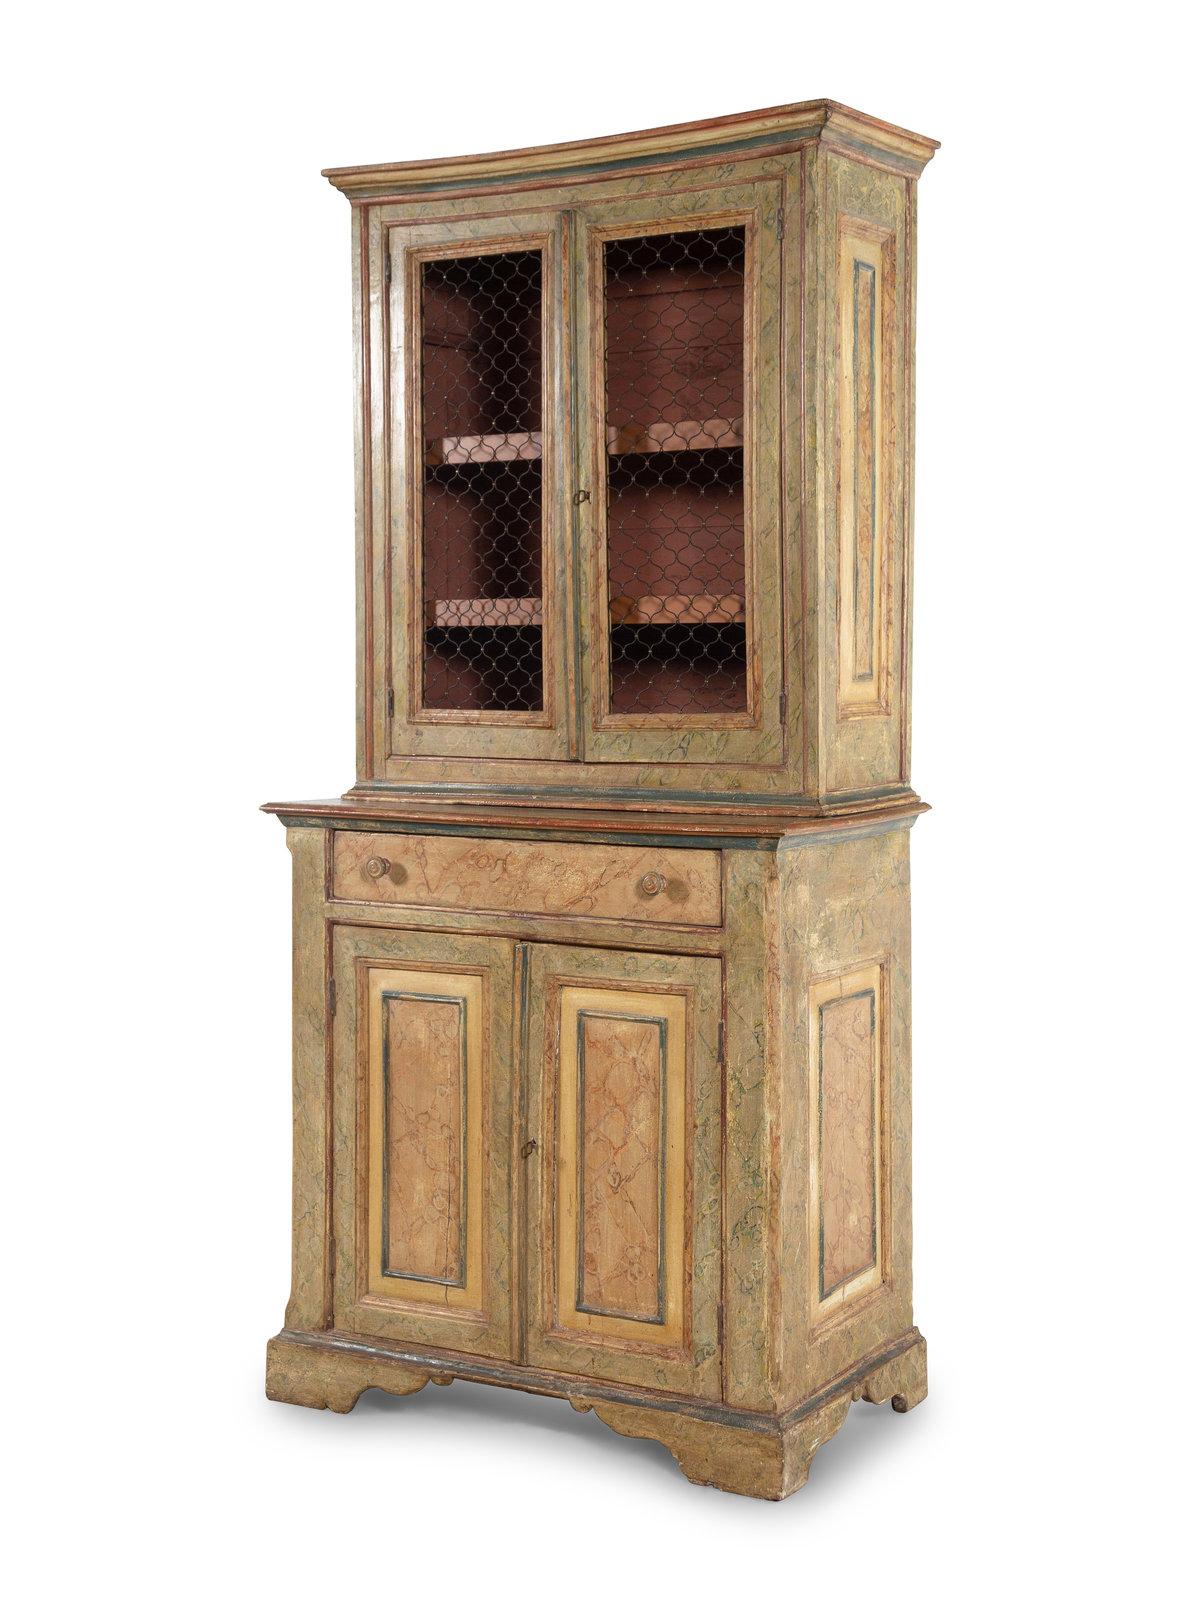 Italian Painted Cupboard or Bookcase, Late 18th Century  In Good Condition For Sale In Savannah, GA